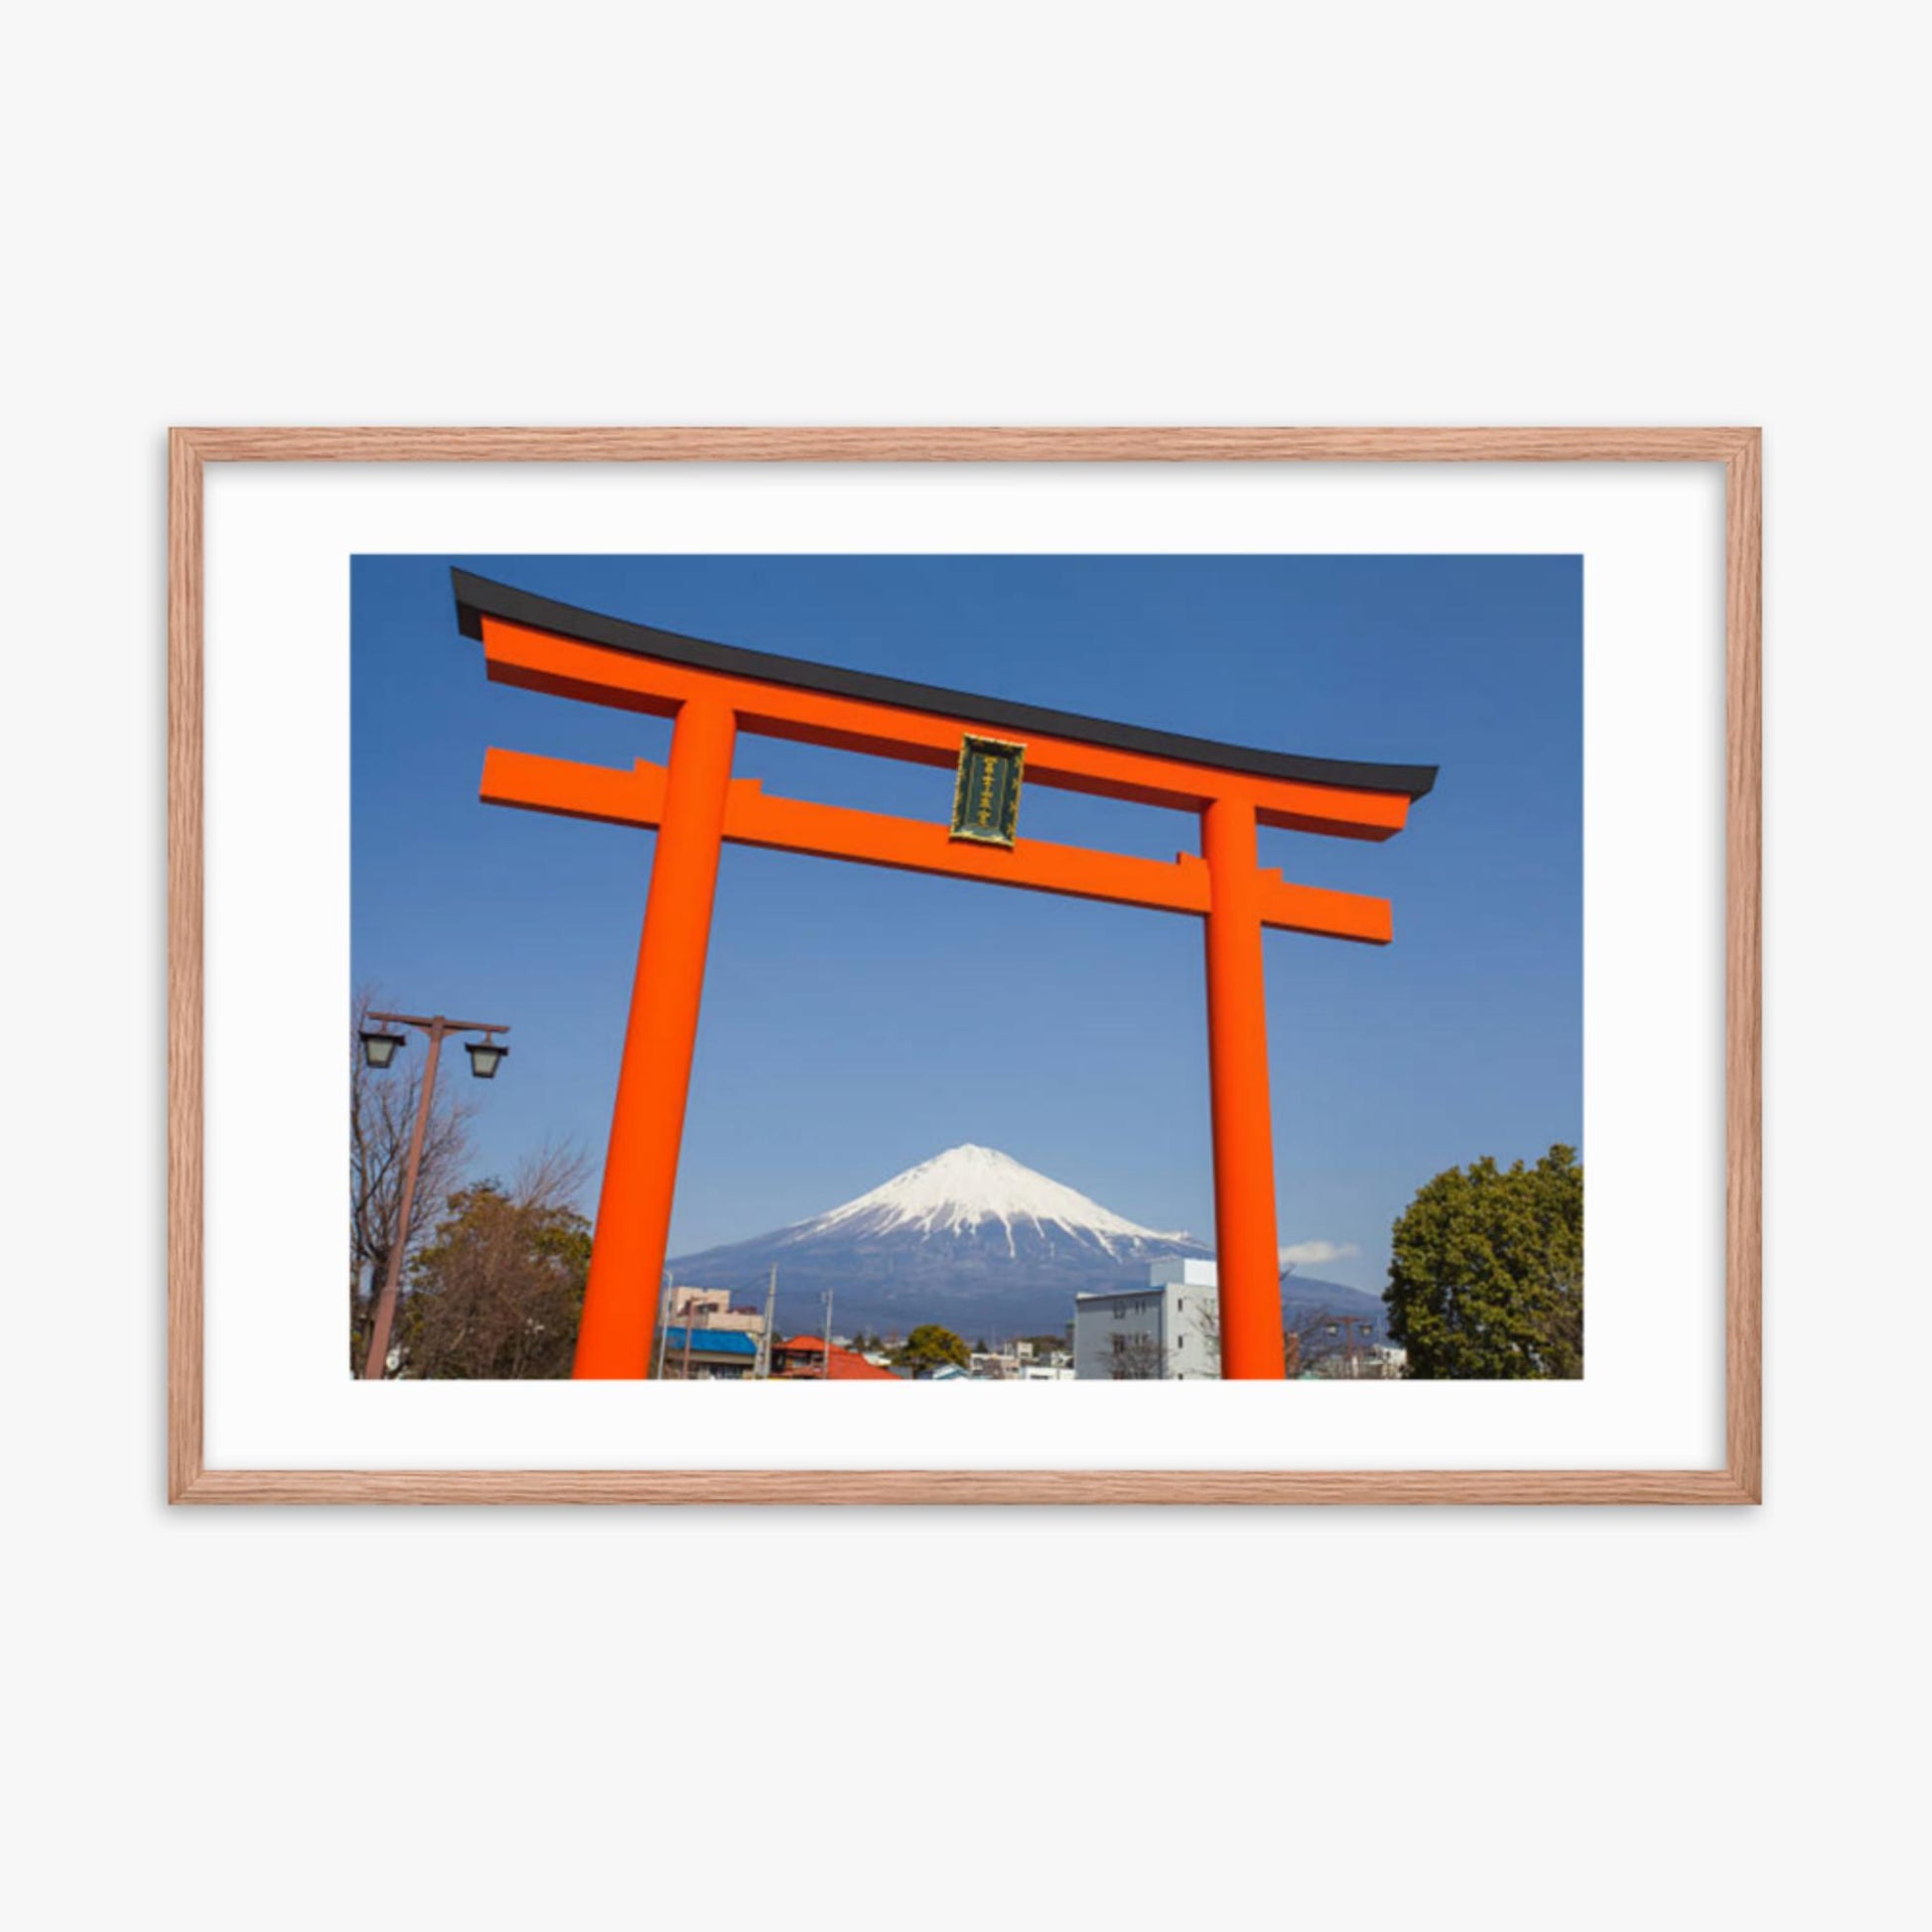 Mount Fuji 24x36 in Poster With Oak Frame